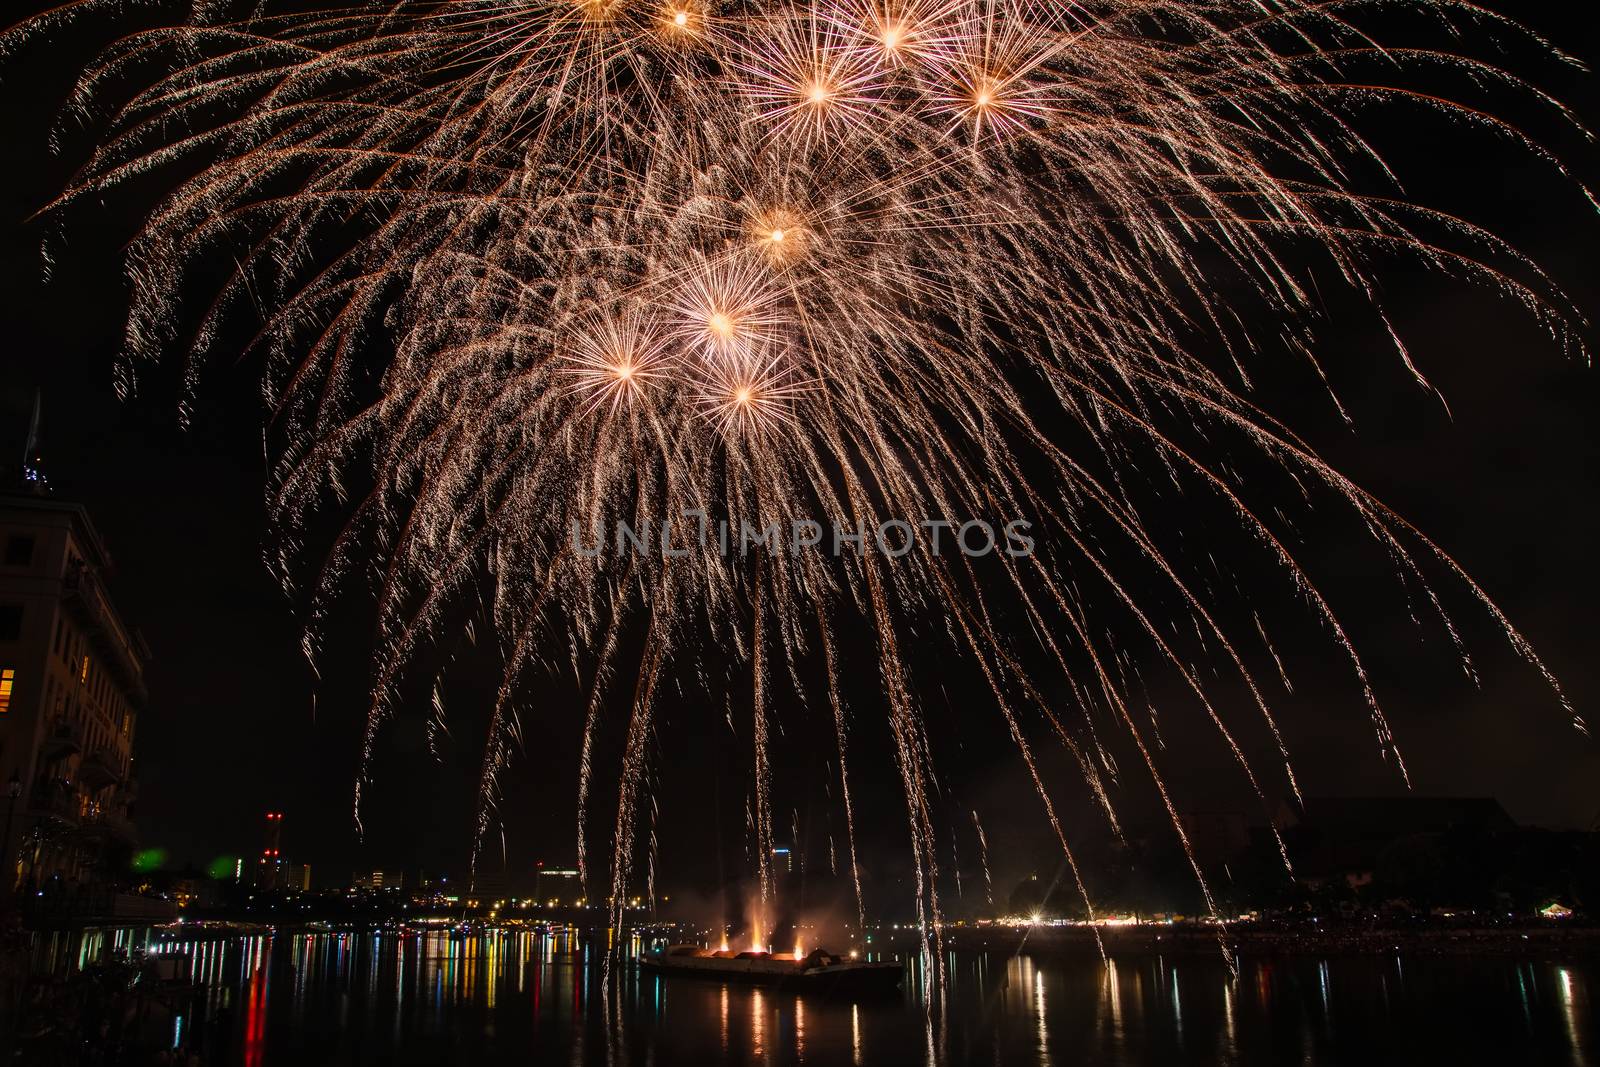 Colorful fireworks of various colors over night sky by ververidis